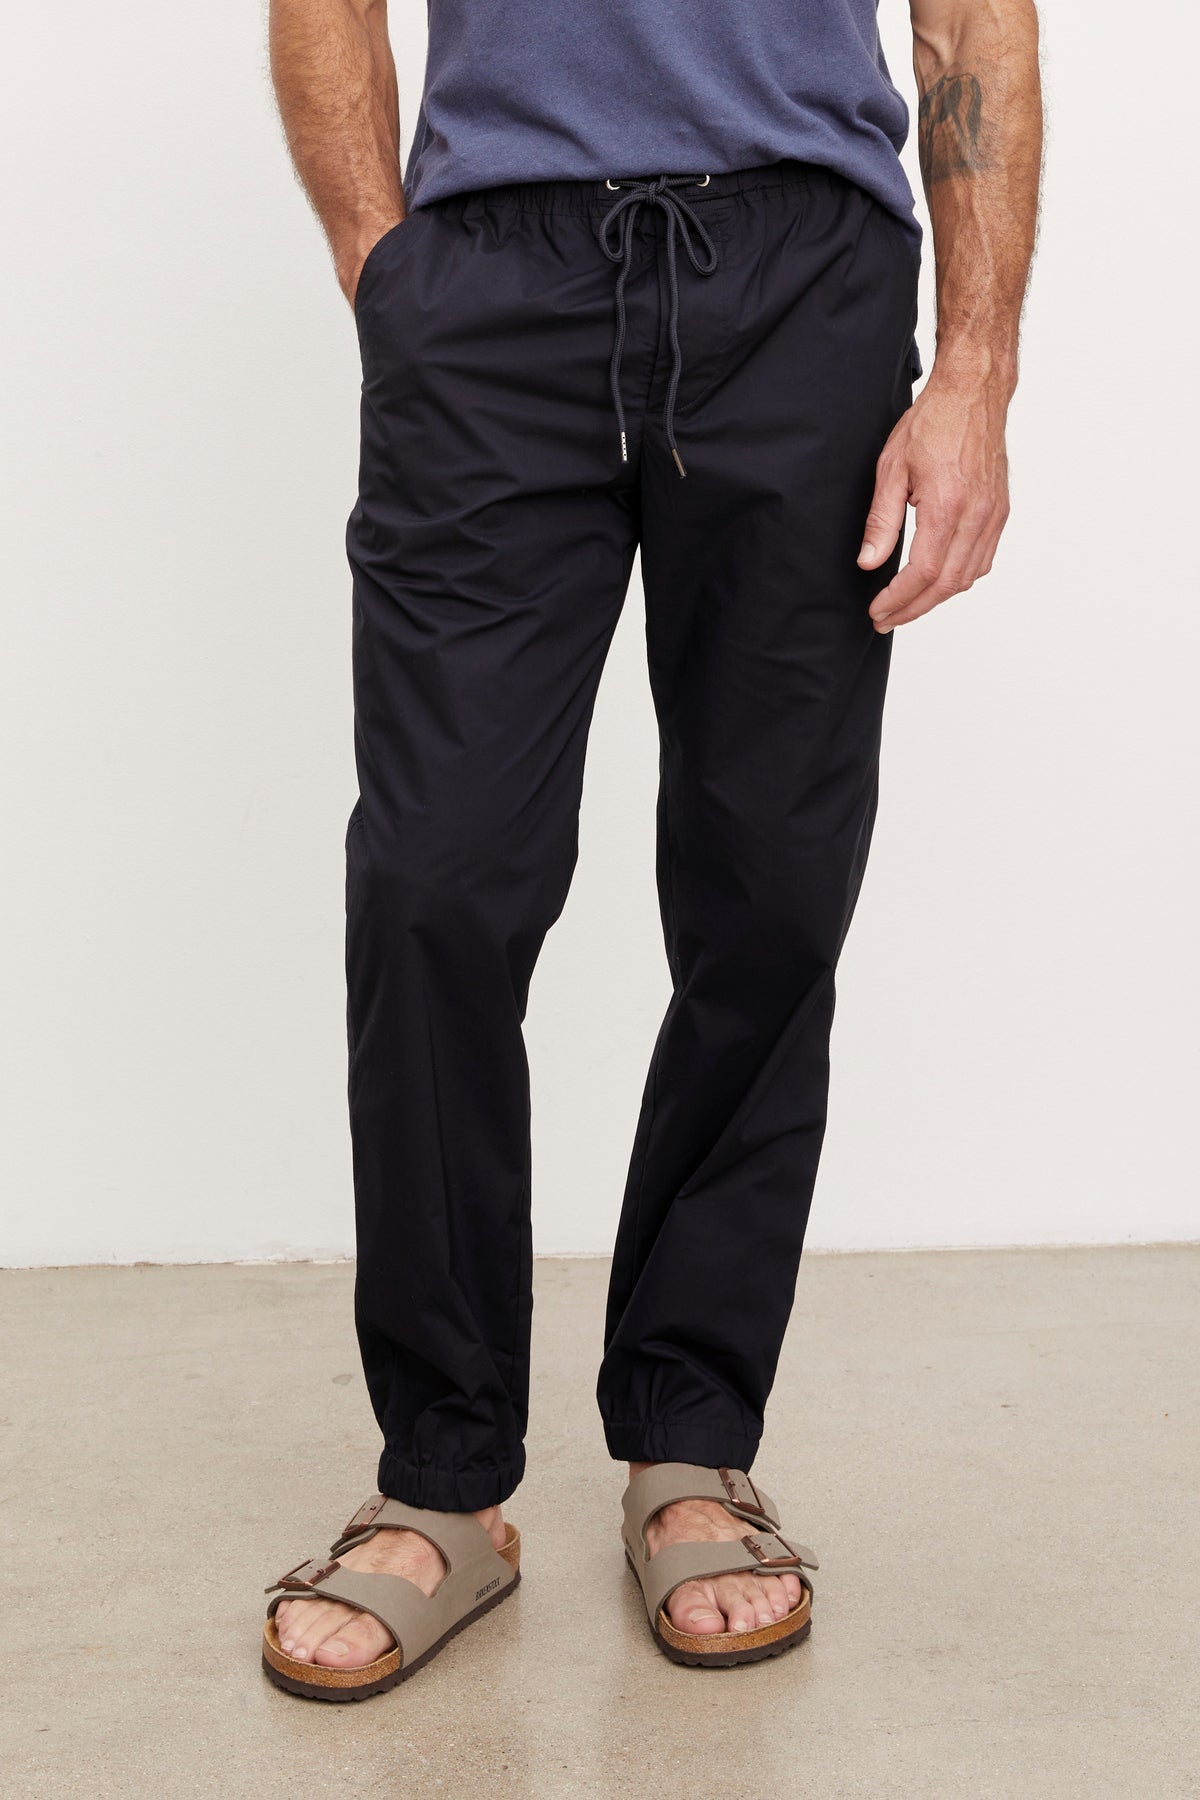 Man wearing Velvet by Graham & Spencer LAZARUS JOGGER and brown sandals, standing in a neutral pose, focusing on the lower body from waist down.-36732528853185